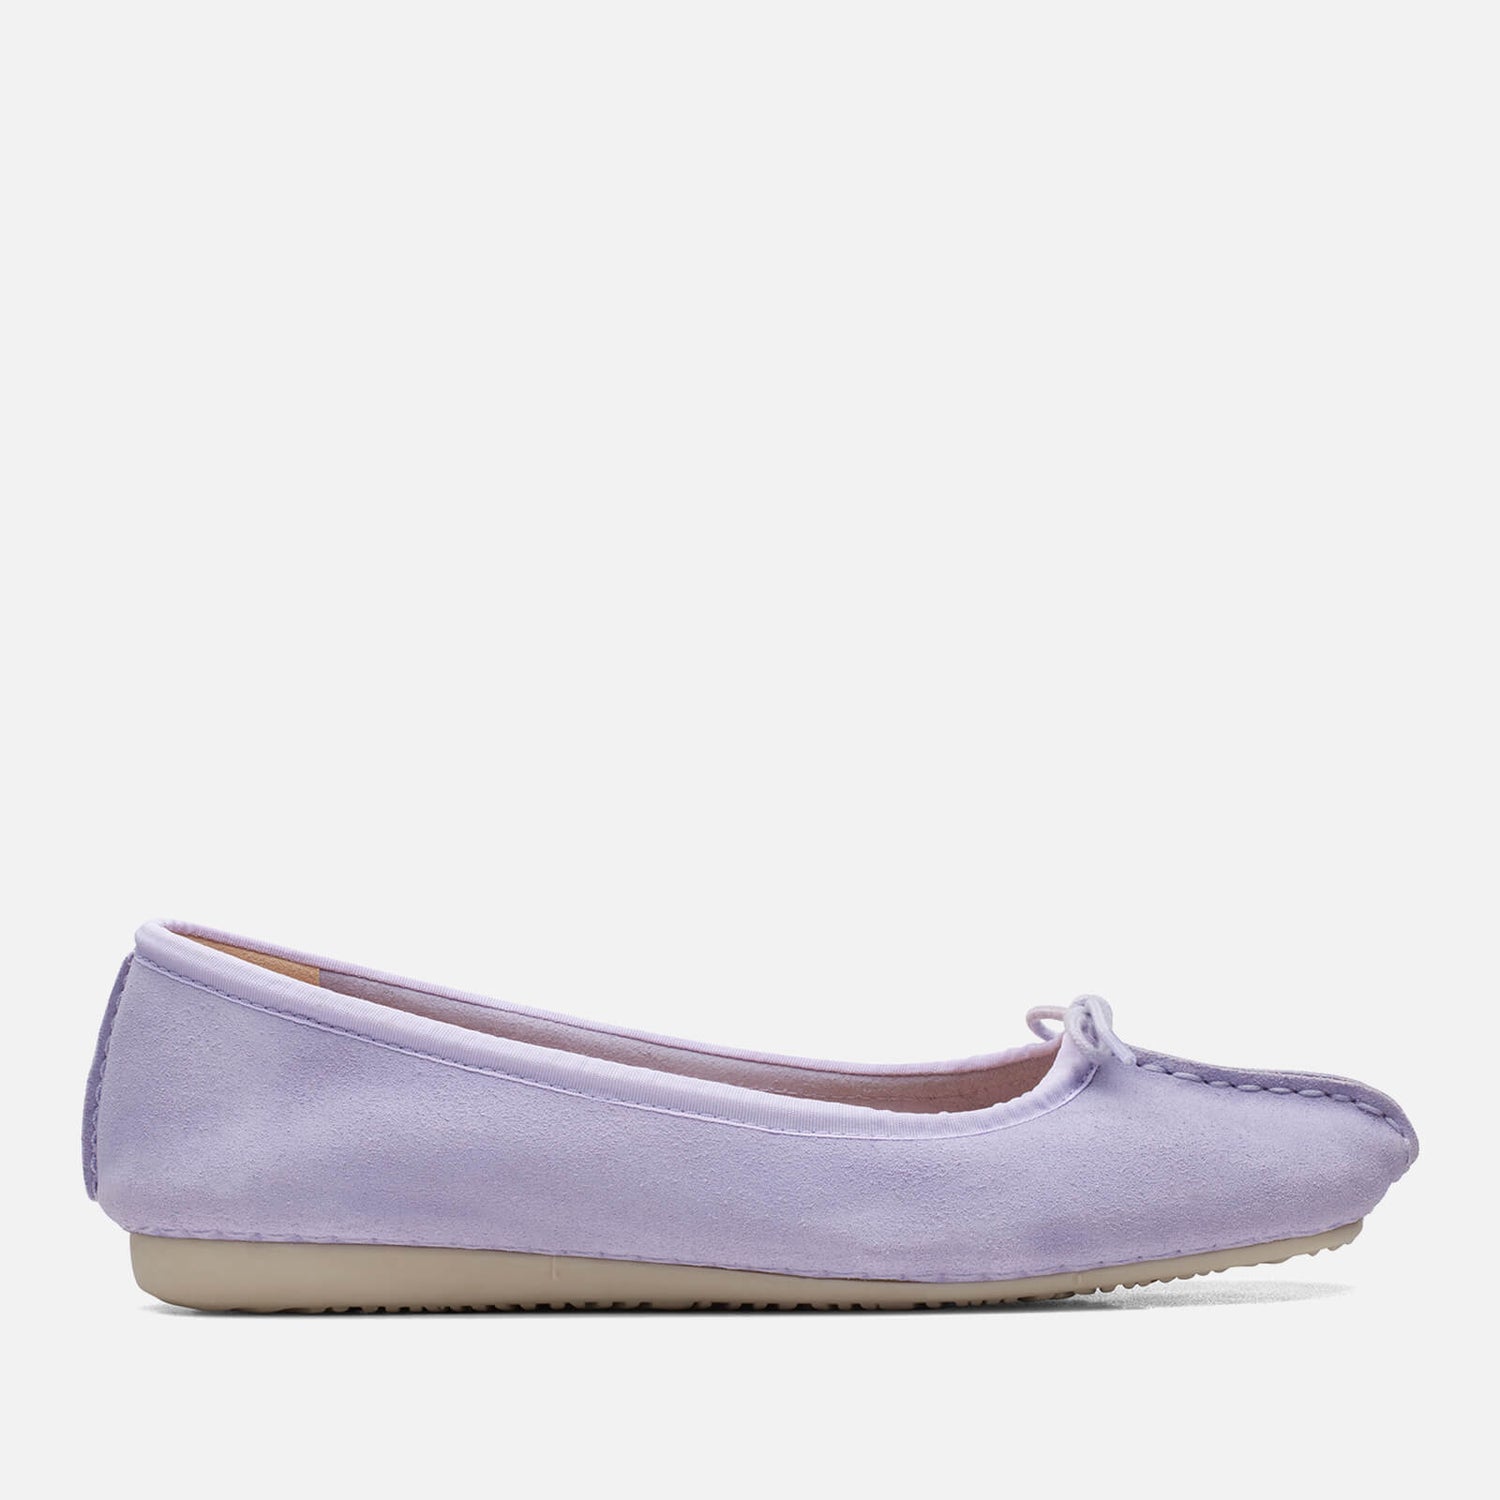 Clarks Freckle Ice Suede Ballet Flats